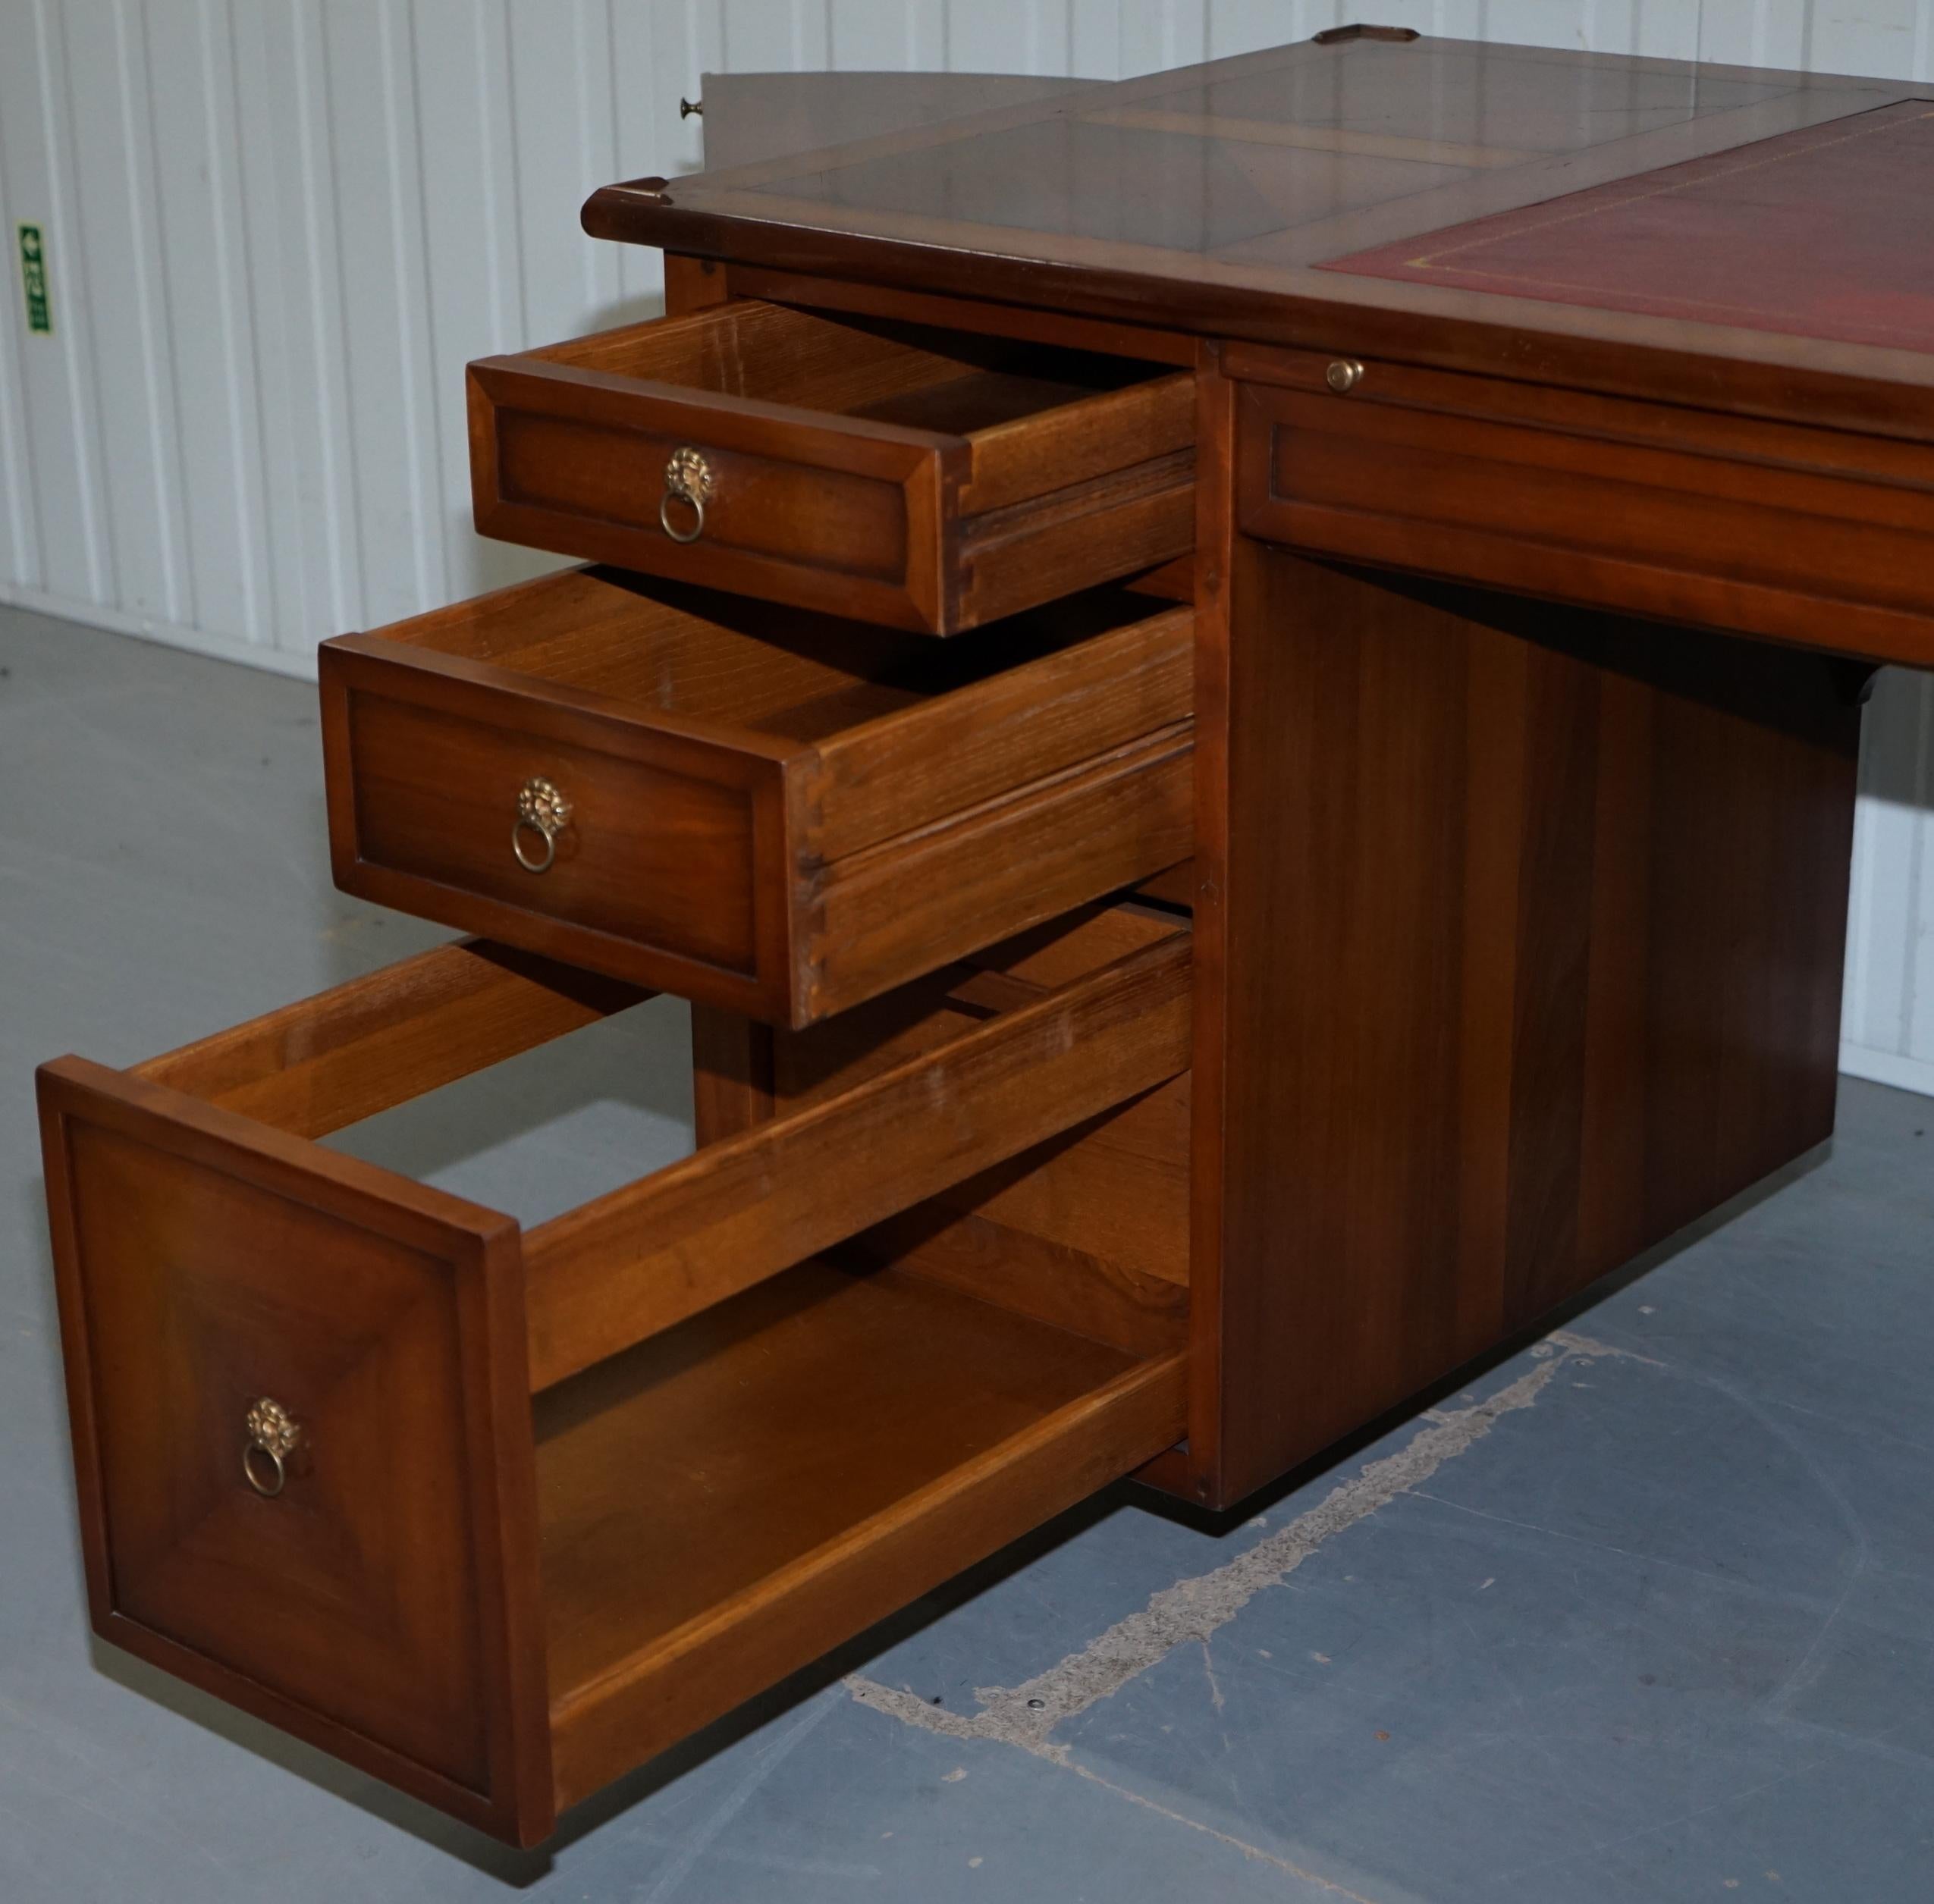 ASSI D'ASOLO ITALY CHERRY WOOD LEATHER DESK DESIGNED To HOUSE COMPUTER 10